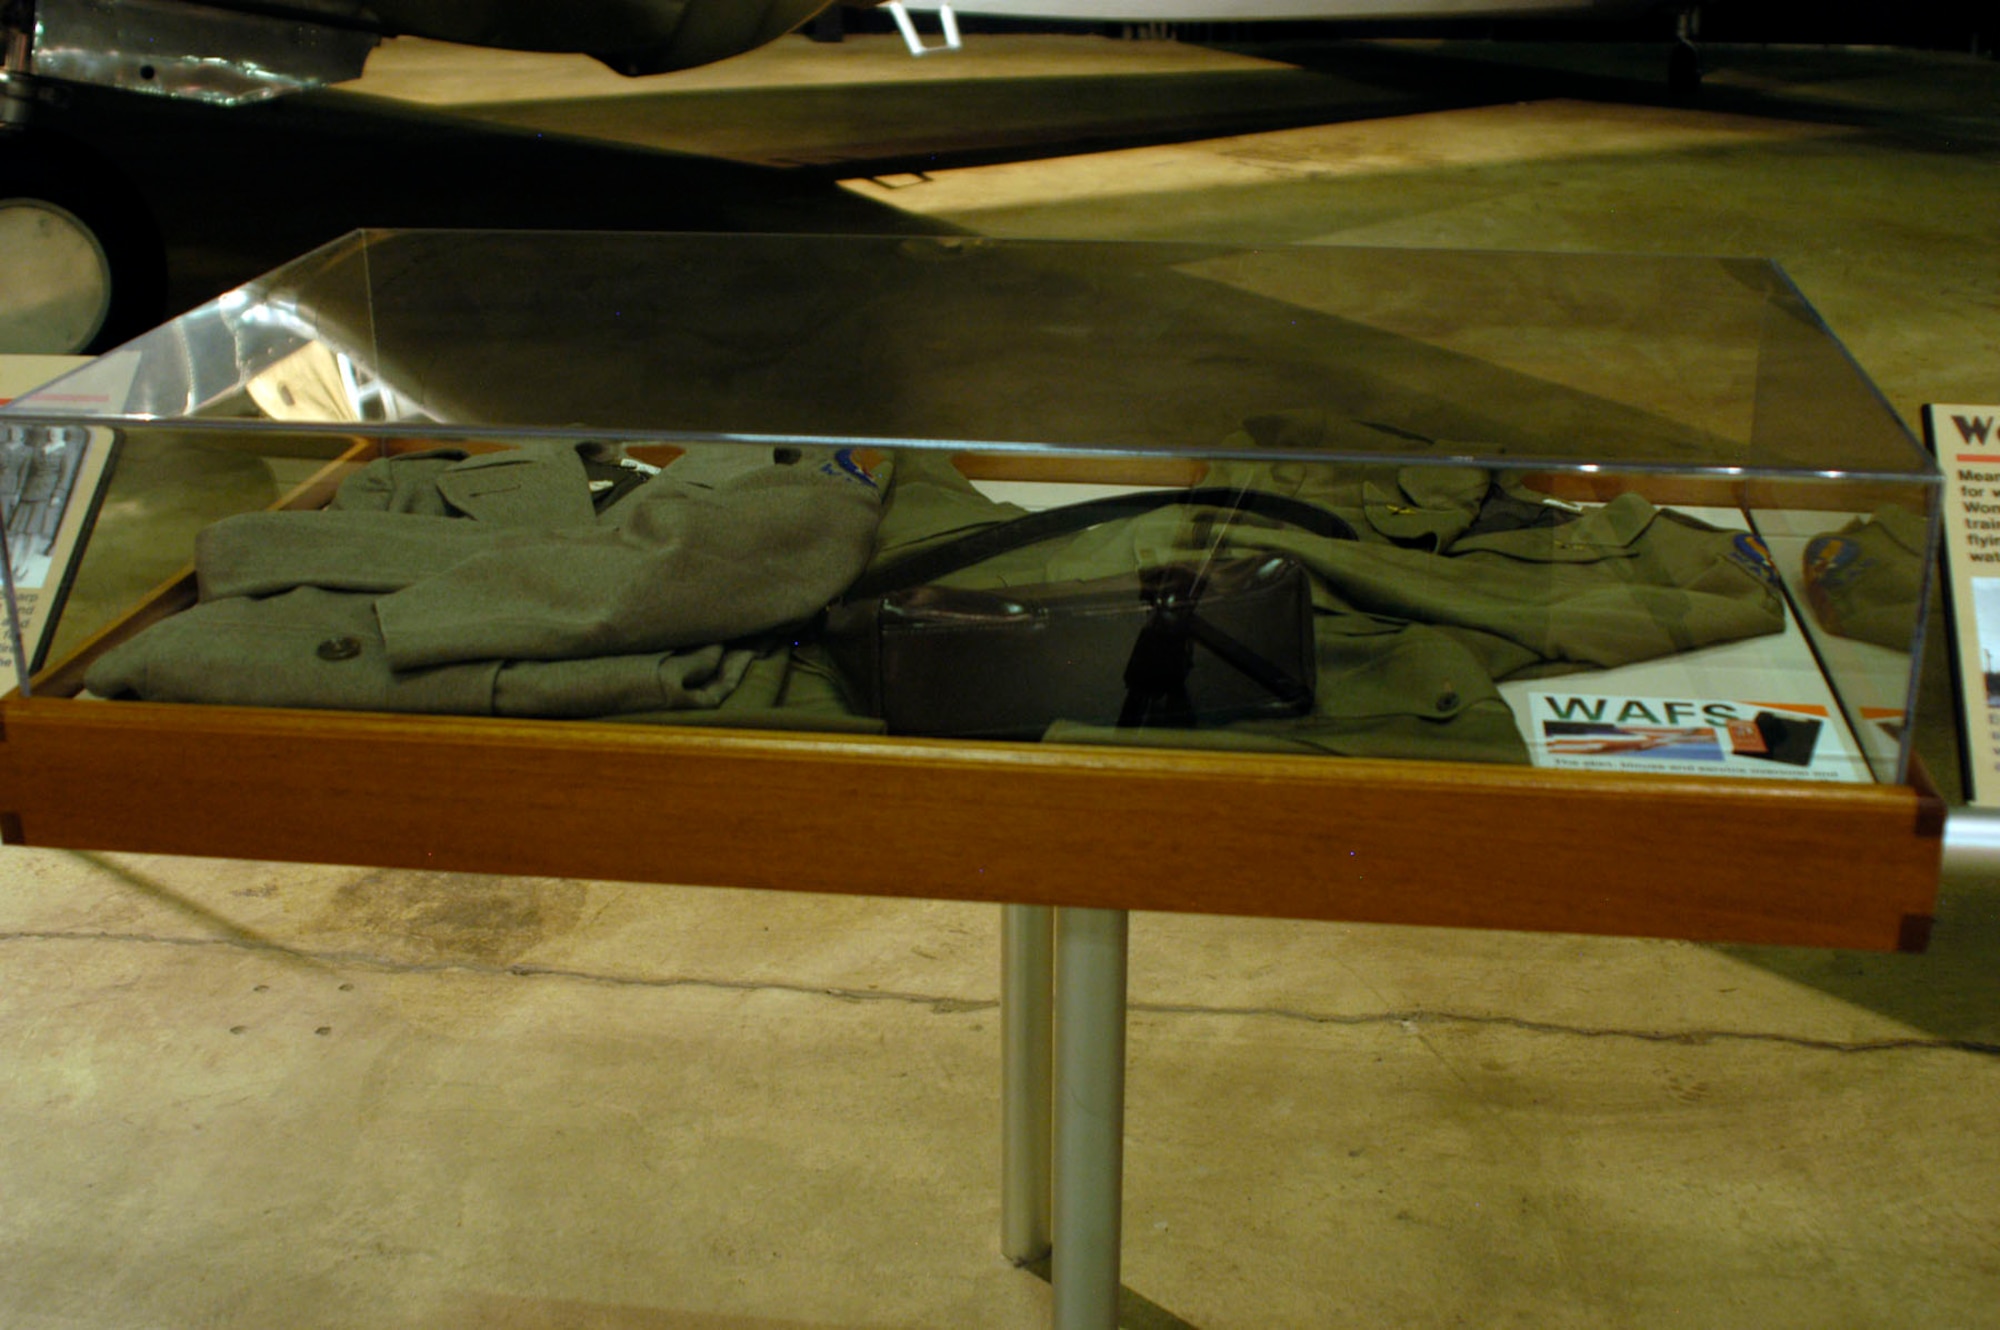 DAYTON, Ohio -- This skirt, blouse, service overcoat and handbag in the World War II Gallery at the National Museum of the U.S. Air Force were worn by the donor while serving as a WAFS pilot. The items were donated by Delphine Bohn of Amarillo, Texas. (U.S. Air Force photo)